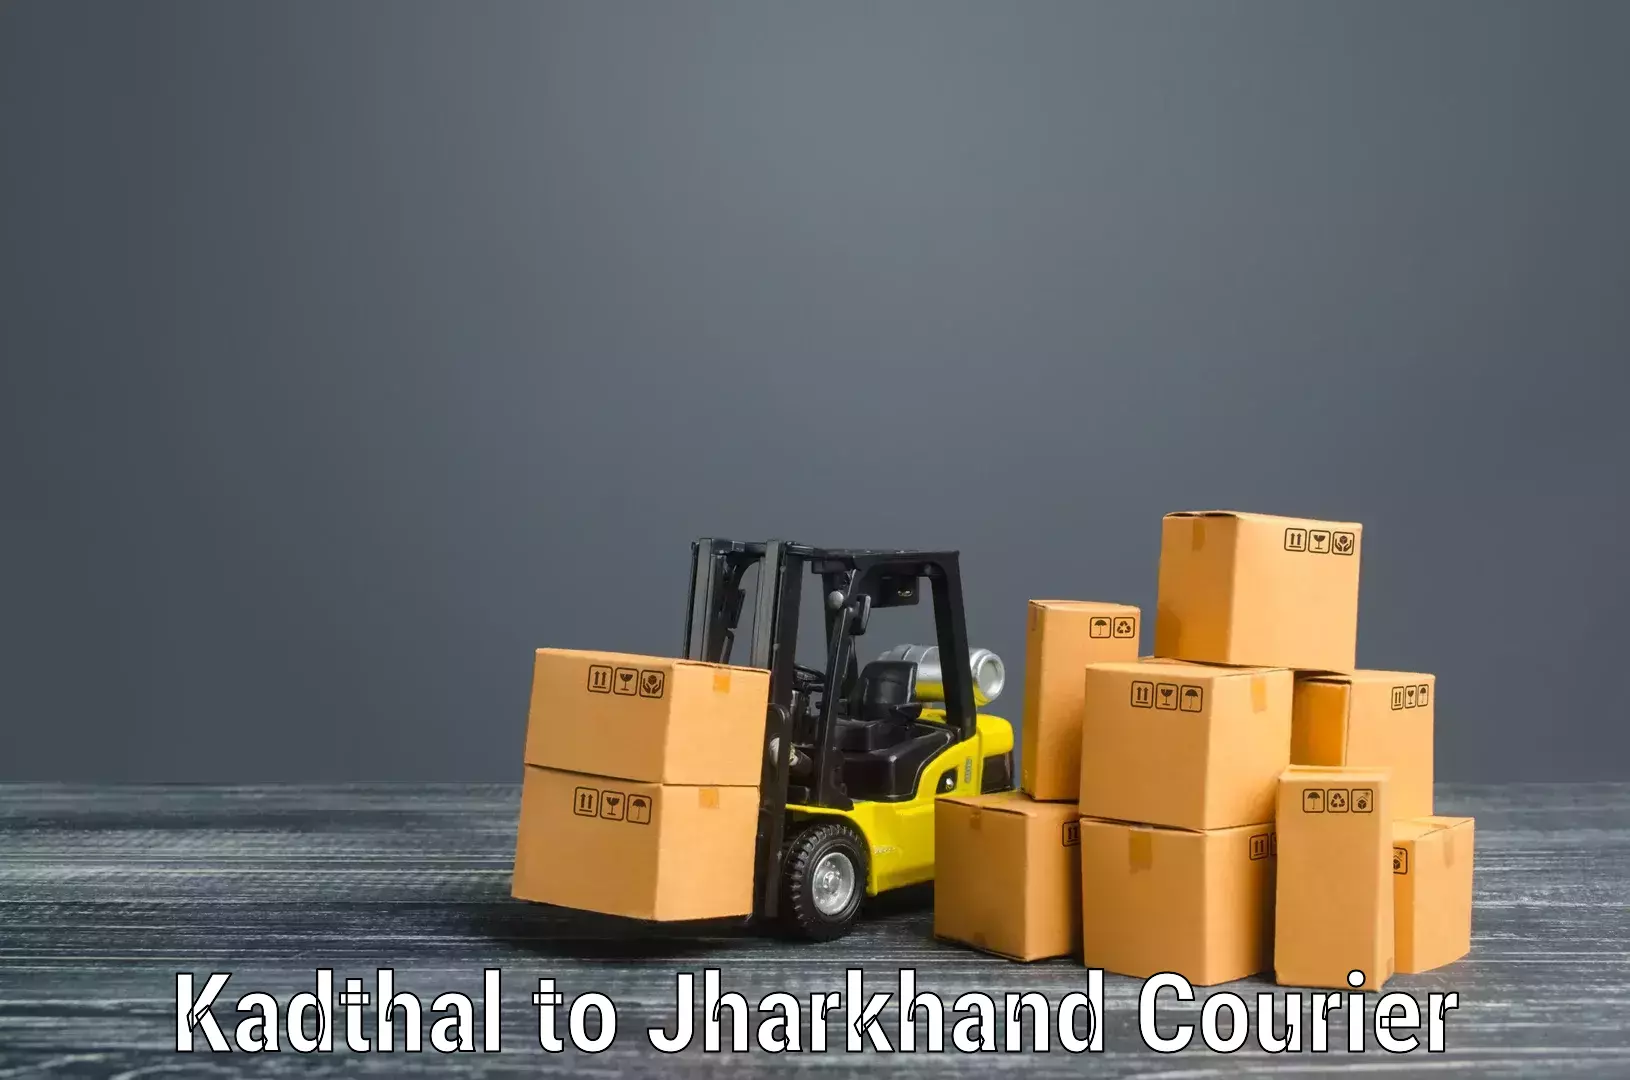 Furniture delivery service Kadthal to Adityapur